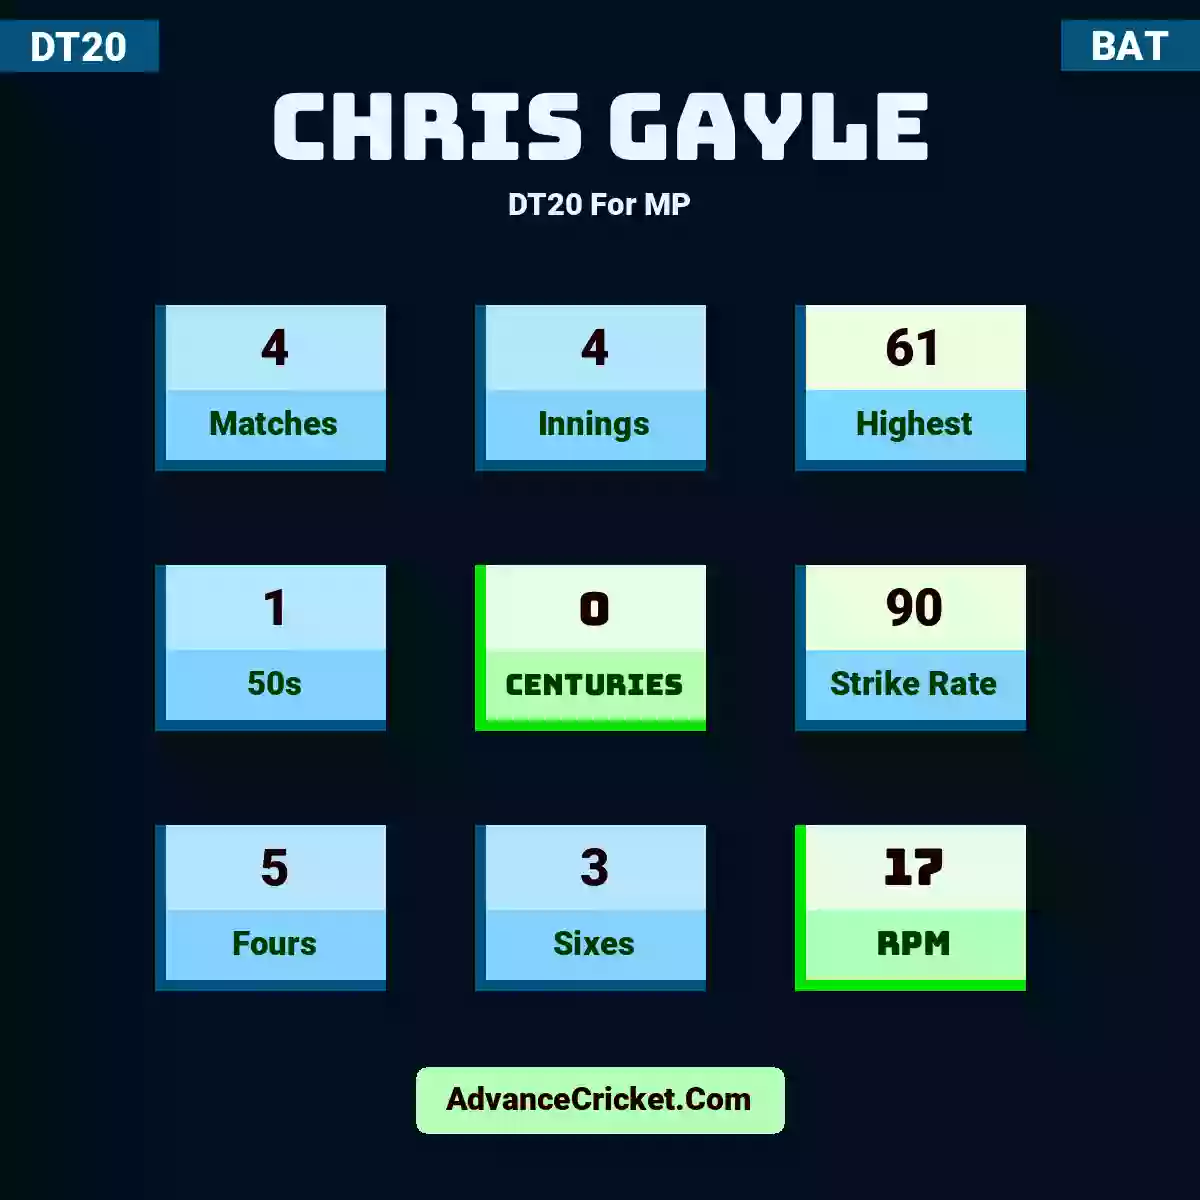 Chris Gayle DT20  For MP, Chris Gayle played 4 matches, scored 61 runs as highest, 1 half-centuries, and 0 centuries, with a strike rate of 90. C.Gayle hit 5 fours and 3 sixes, with an RPM of 17.